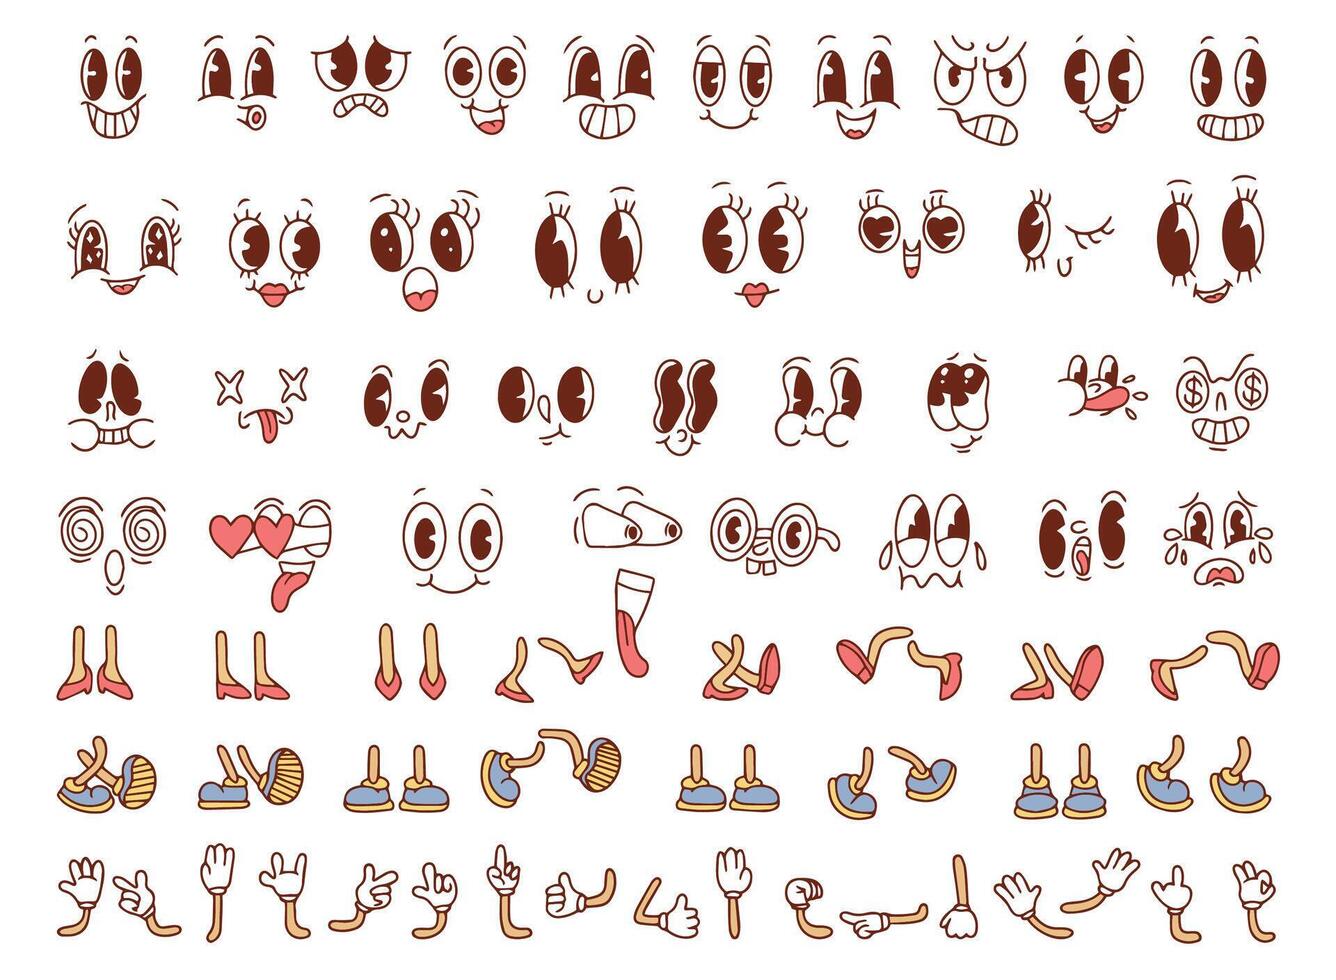 Vintage cartoon hands in gloves and feet in shoes.Comic hand gestures and walking legs set. Cute animated characters body parts. vector